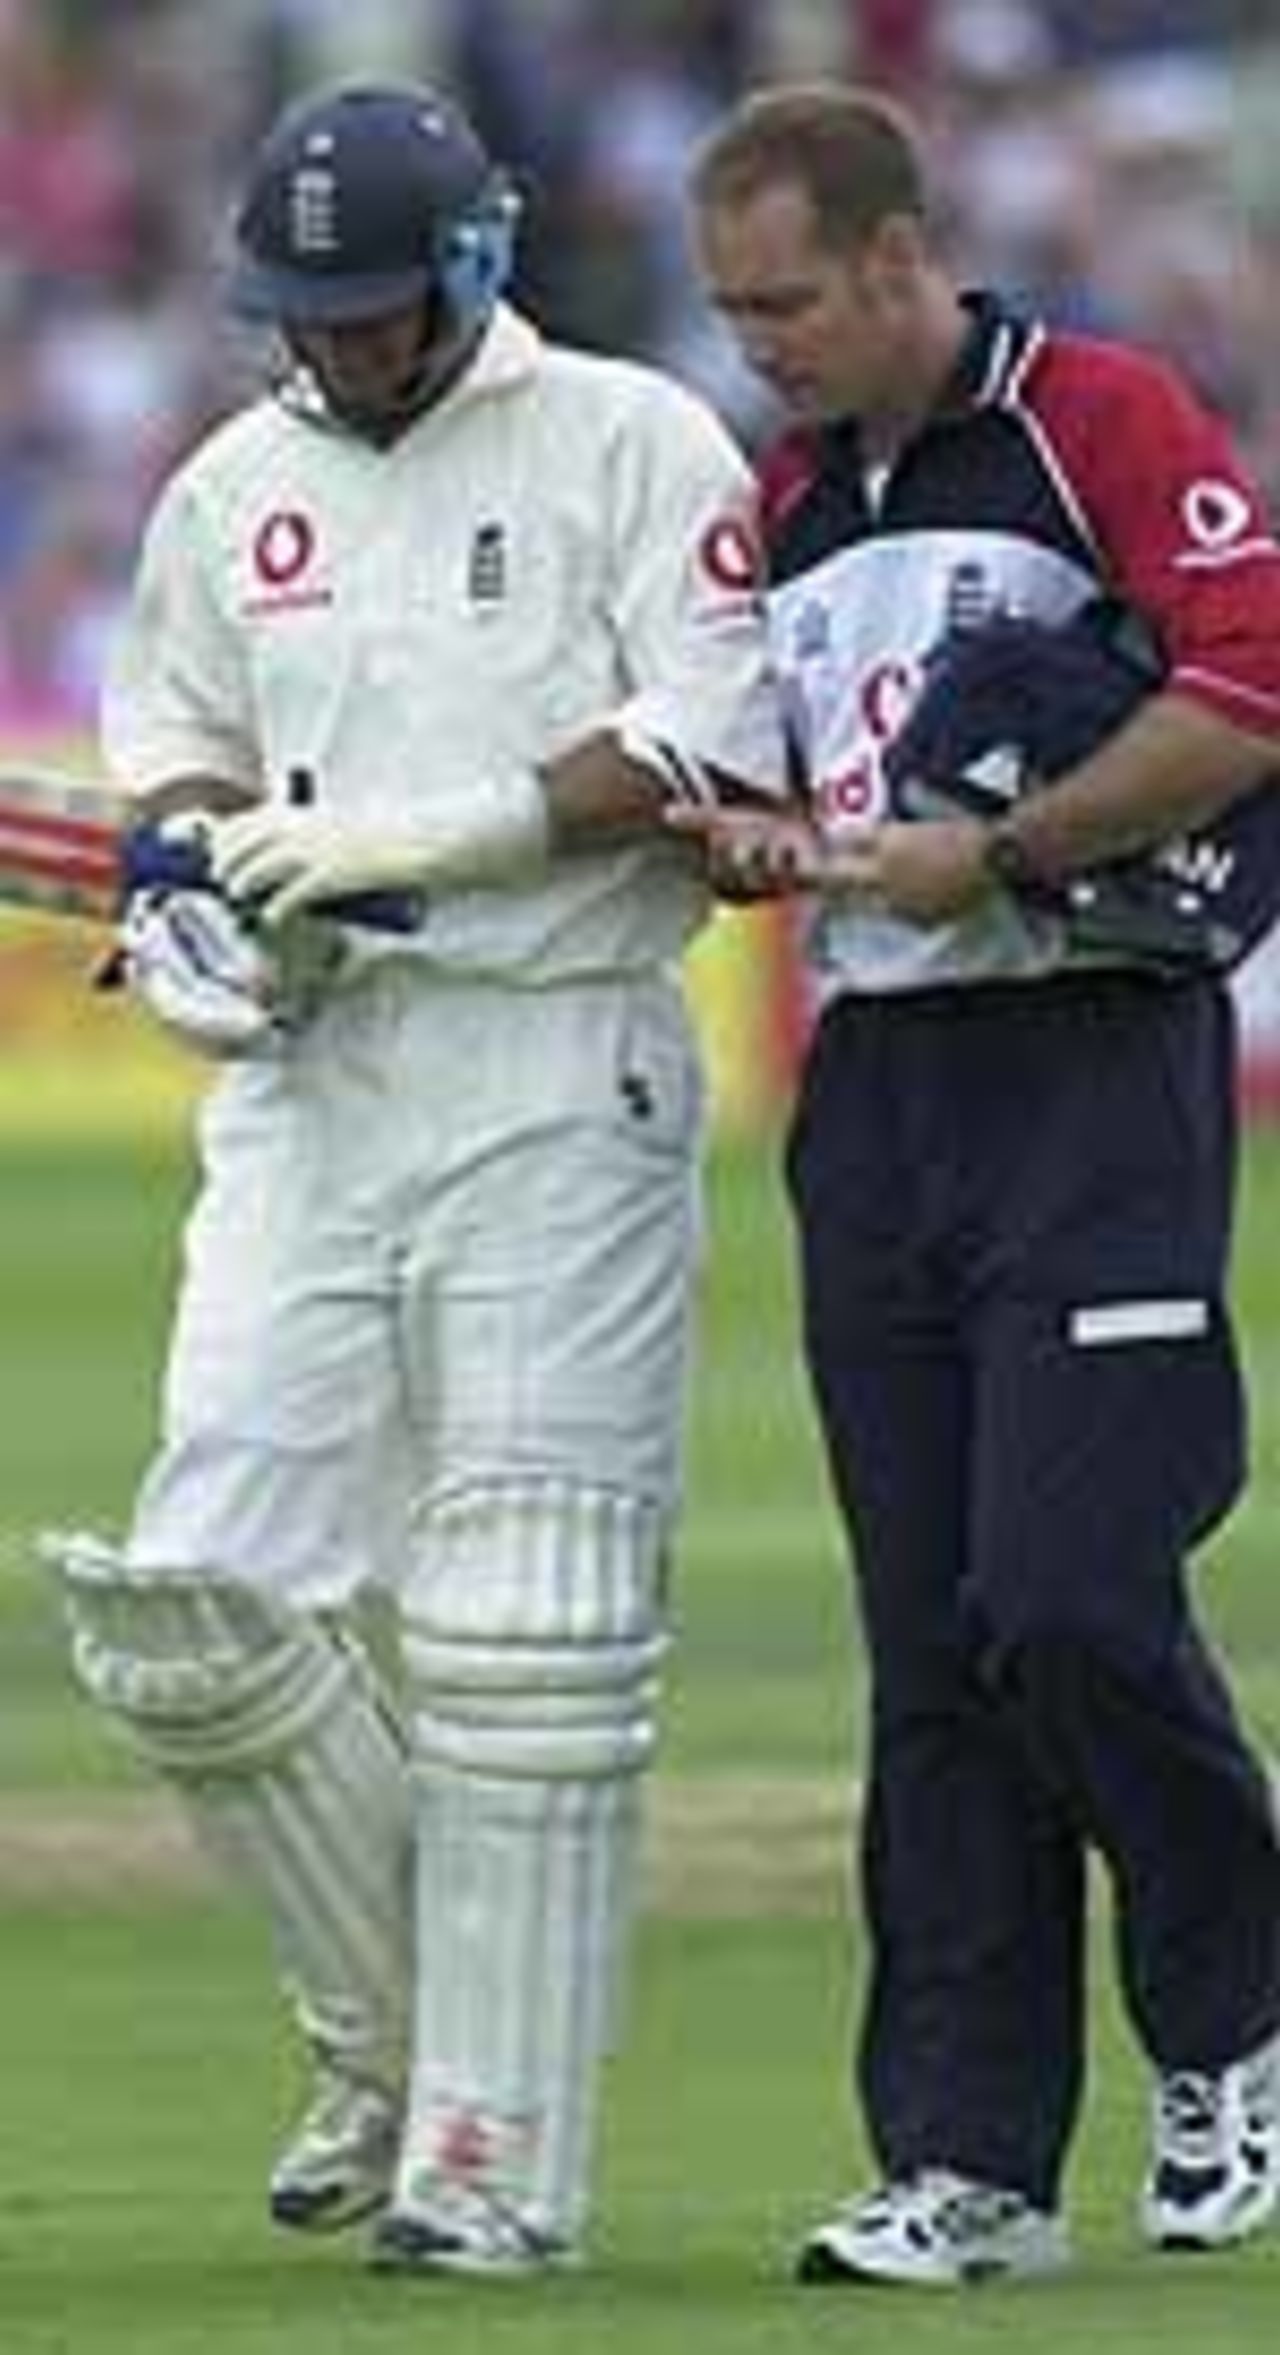 Taken during the 2001 Ashes series